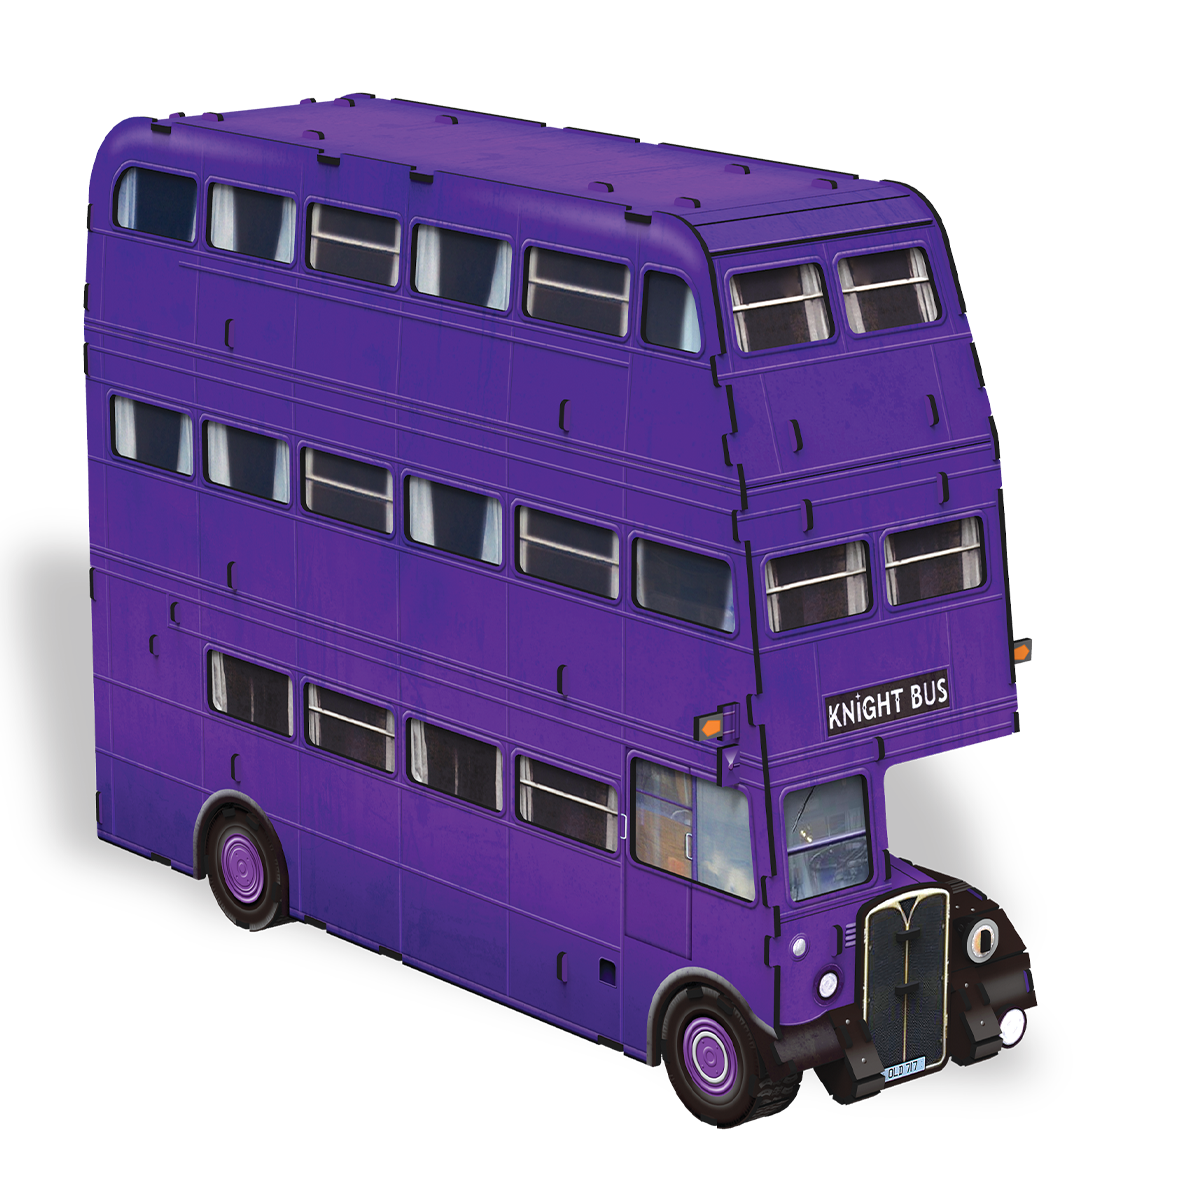 Harry Potter 3D Paper Models: The Knight Bus™ 73pc